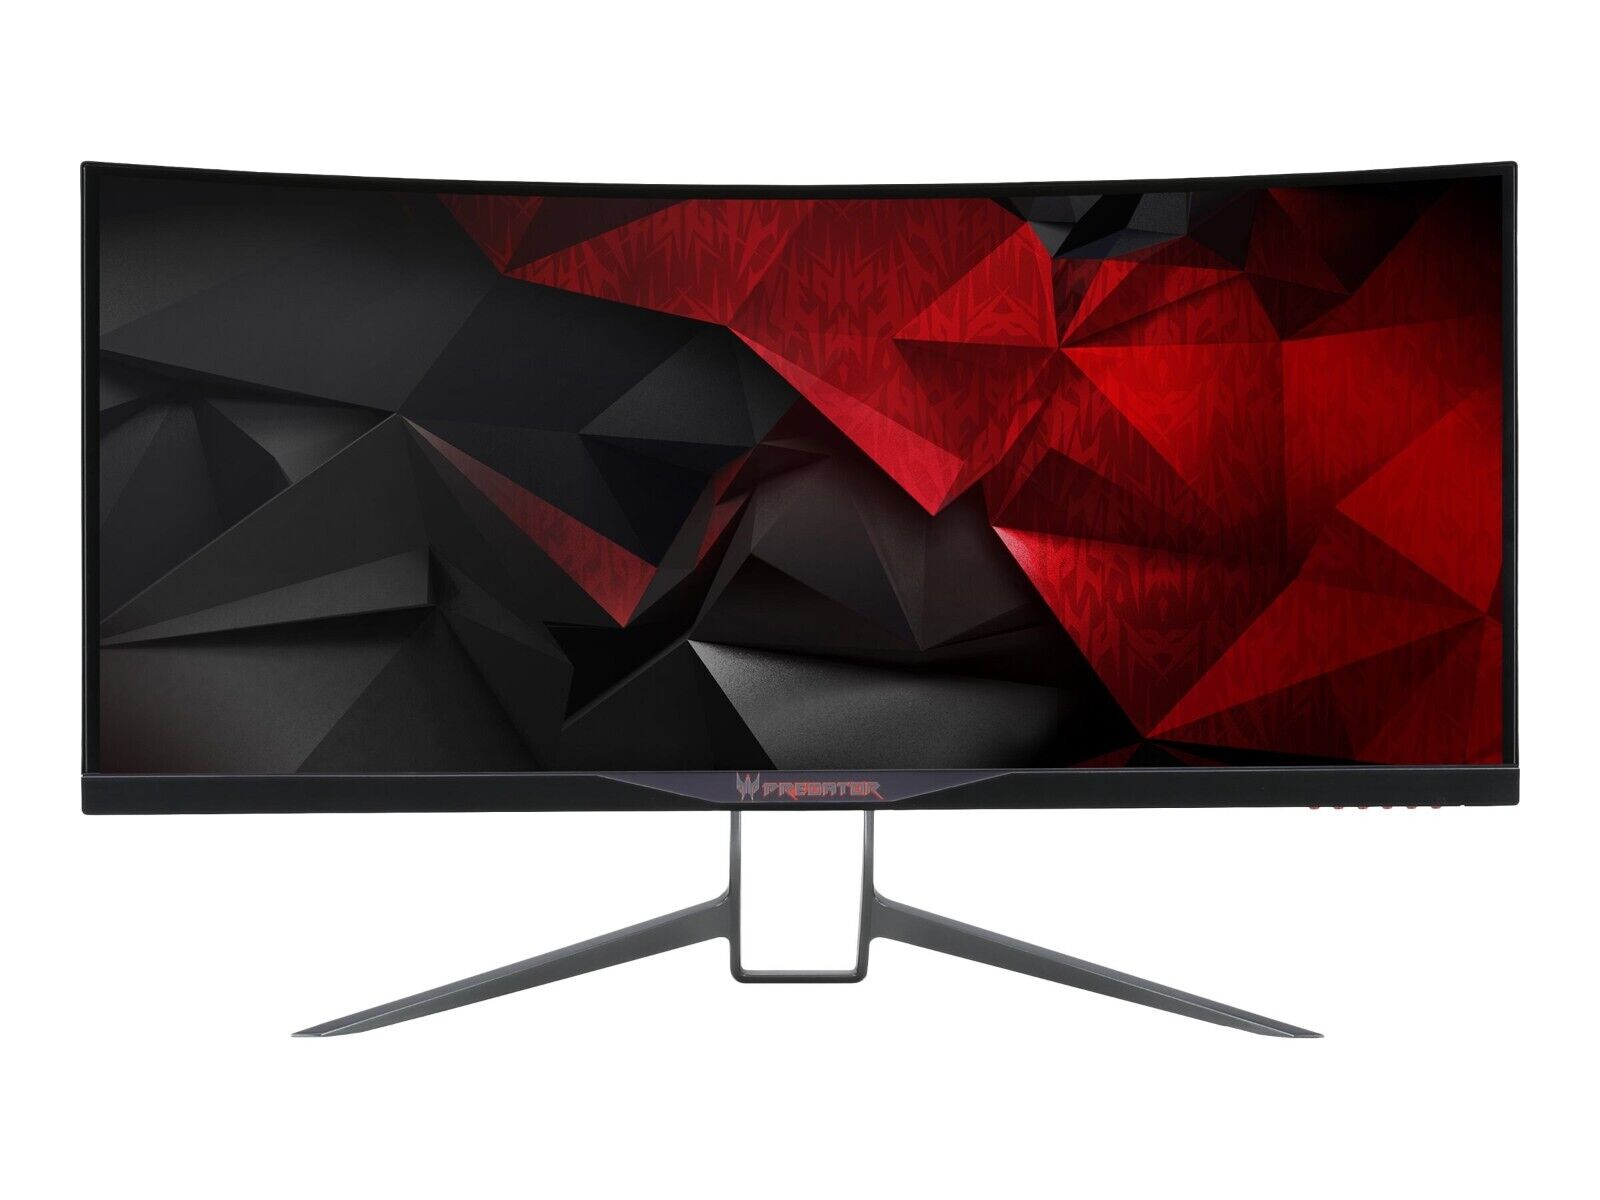 Acer Predator x34 IPS Gaming Monitor 120hz ultra wide curved G-SYNC